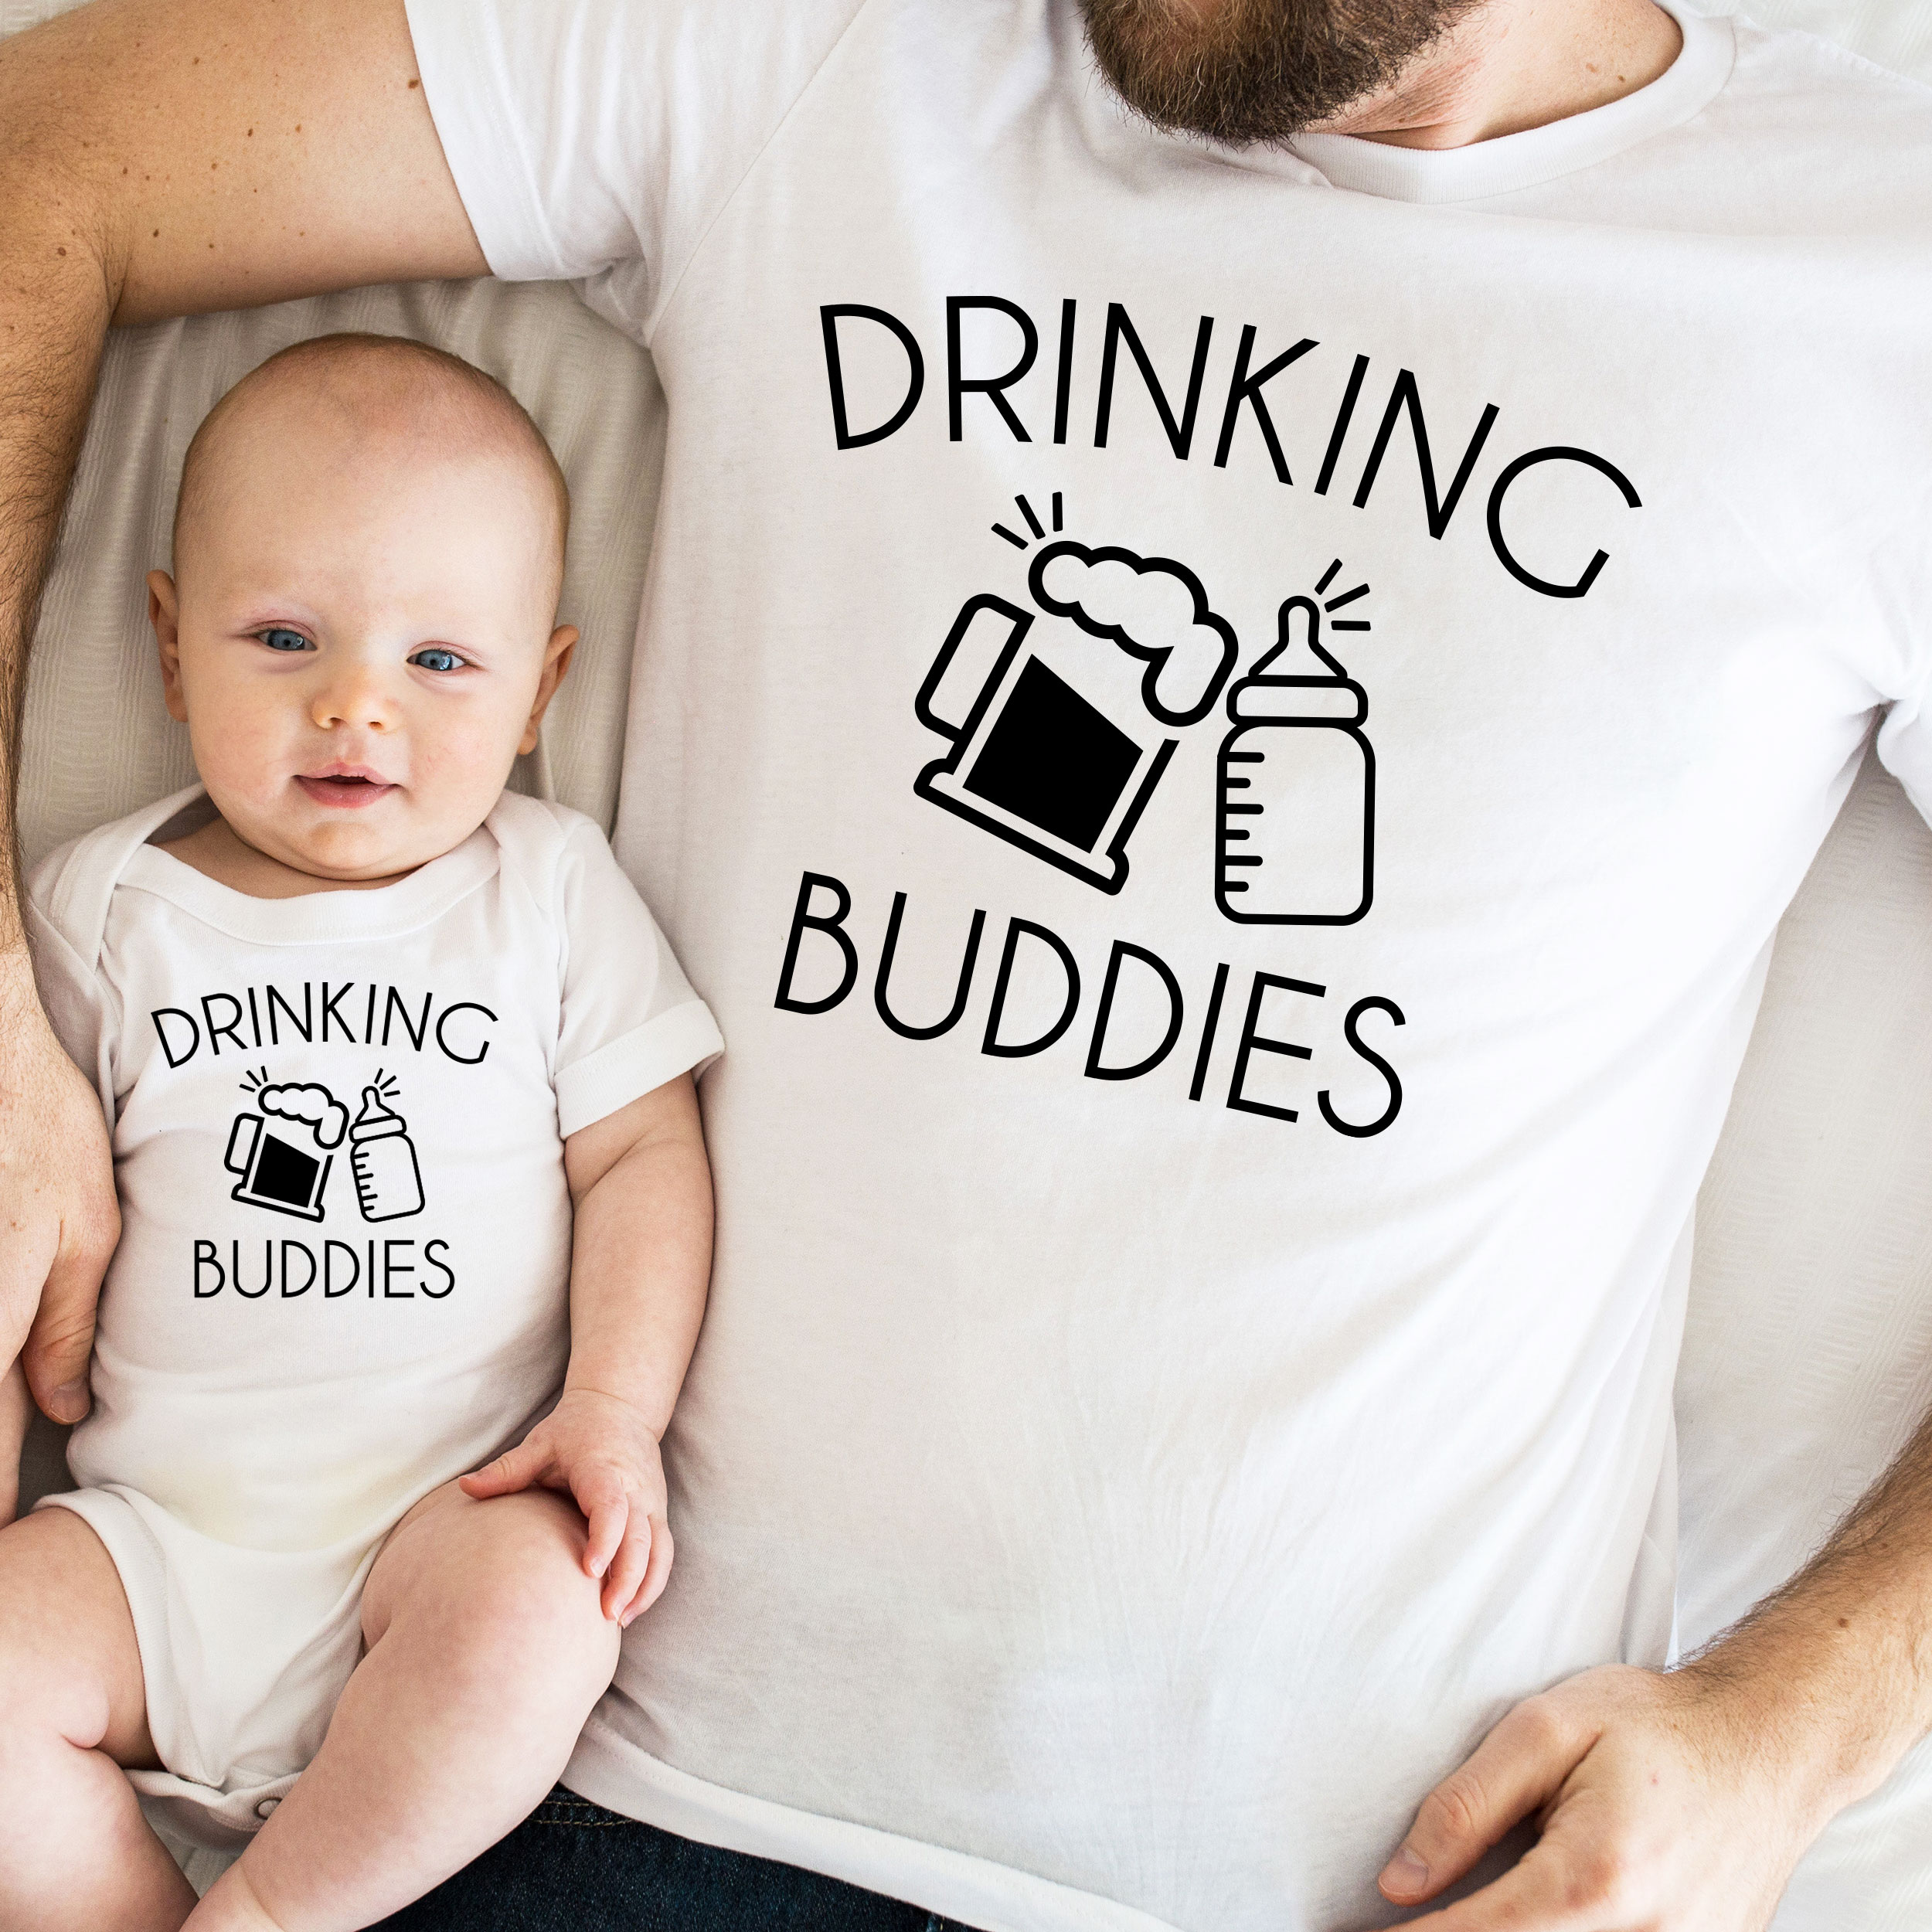 https://cdn11.bigcommerce.com/s-5grzuu6/images/stencil/original/products/6180/48175/Drinking-Buddies-Matching_Dad-Shirt_Baby-Outfit__24386.1653499037.jpg?c=2